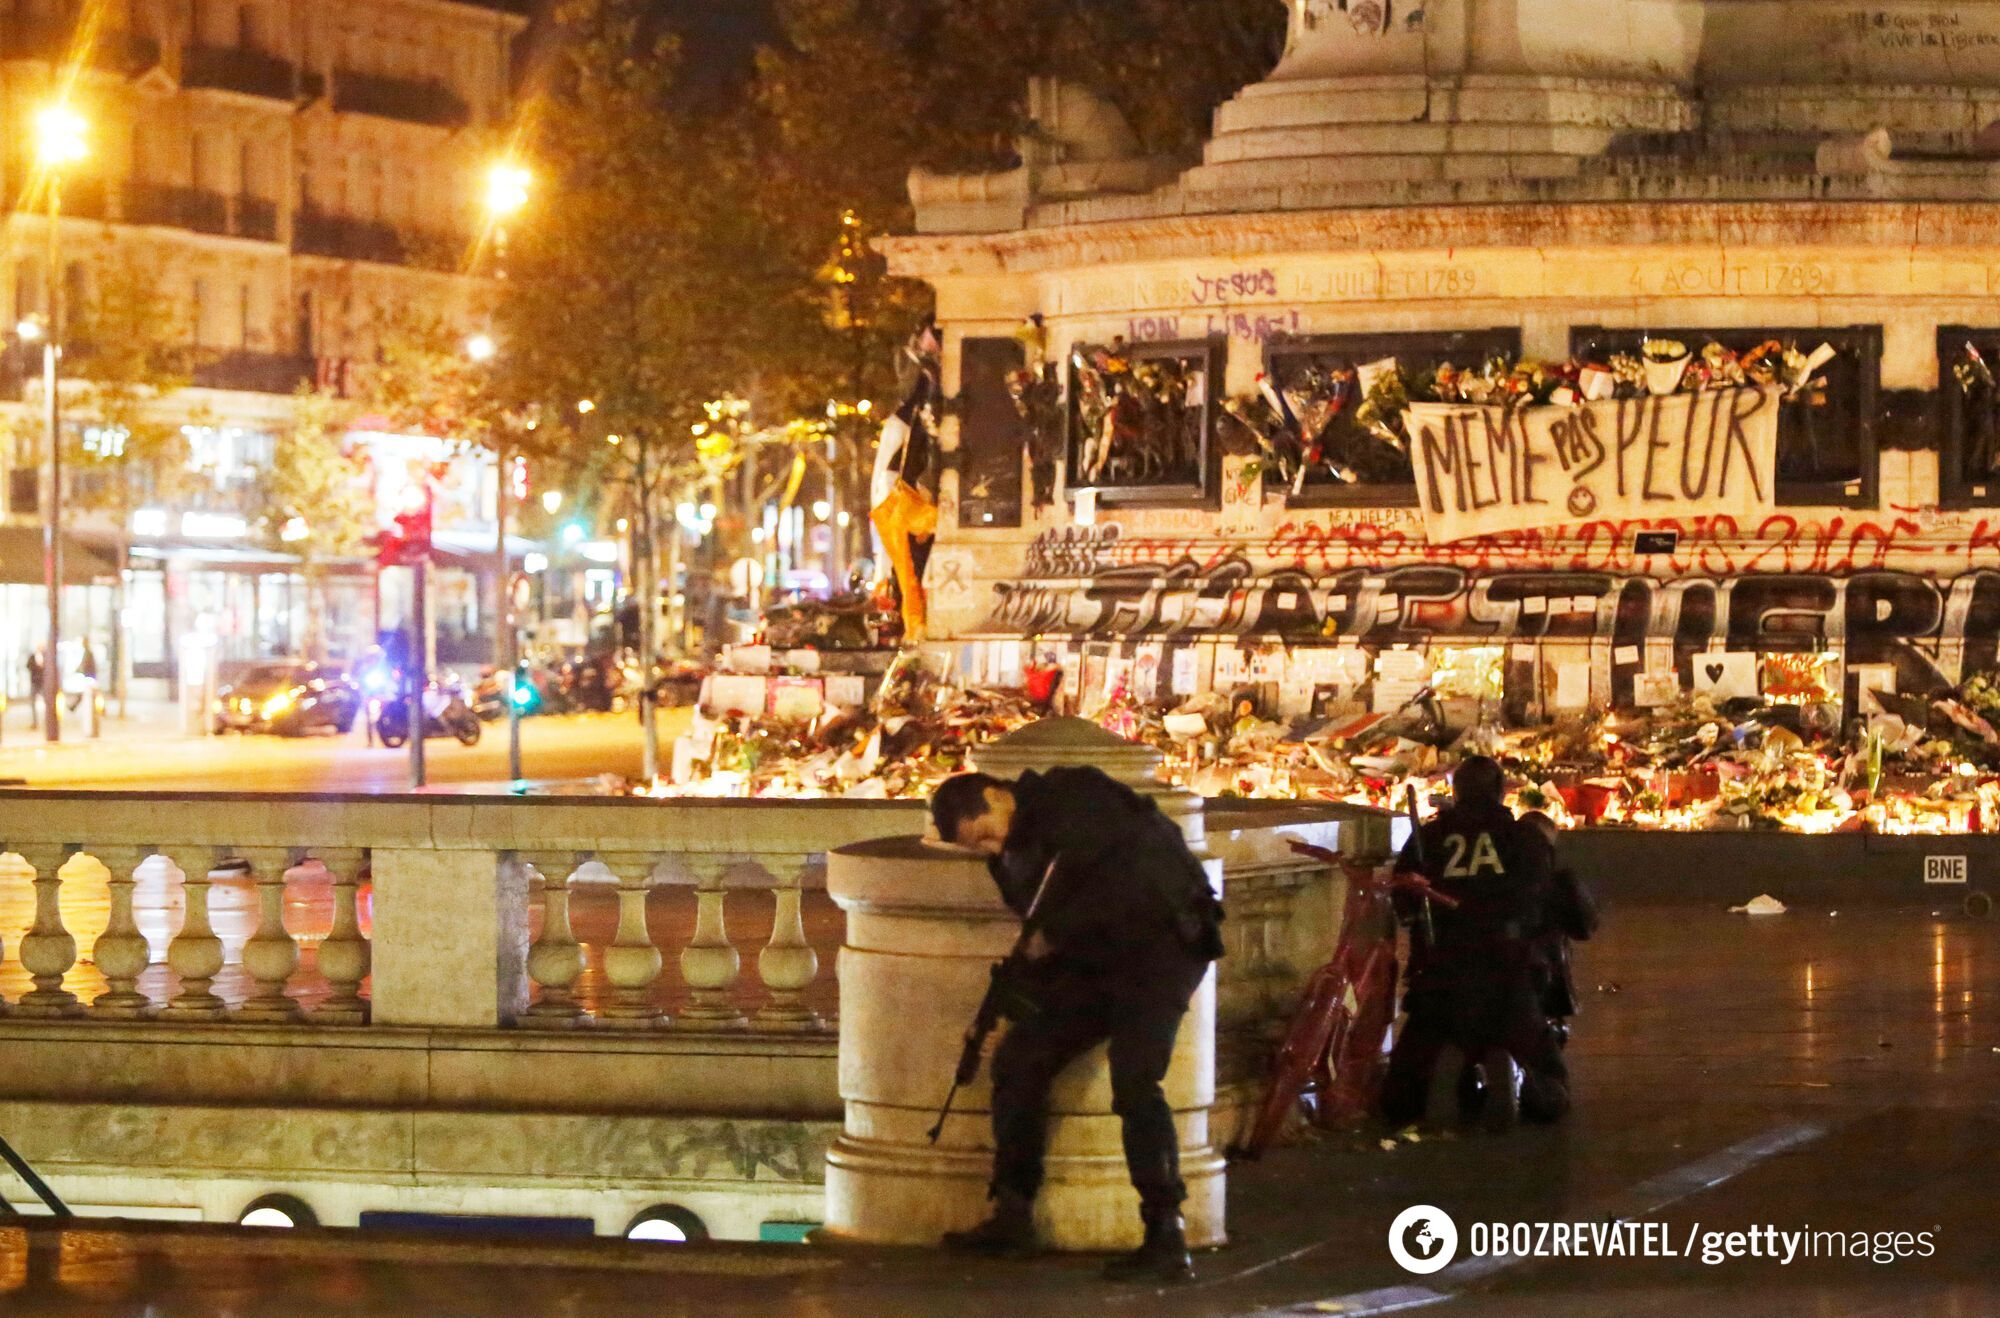 A state of emergency has been declared in France for the fourth time in its history due to a series of terrorist attacks